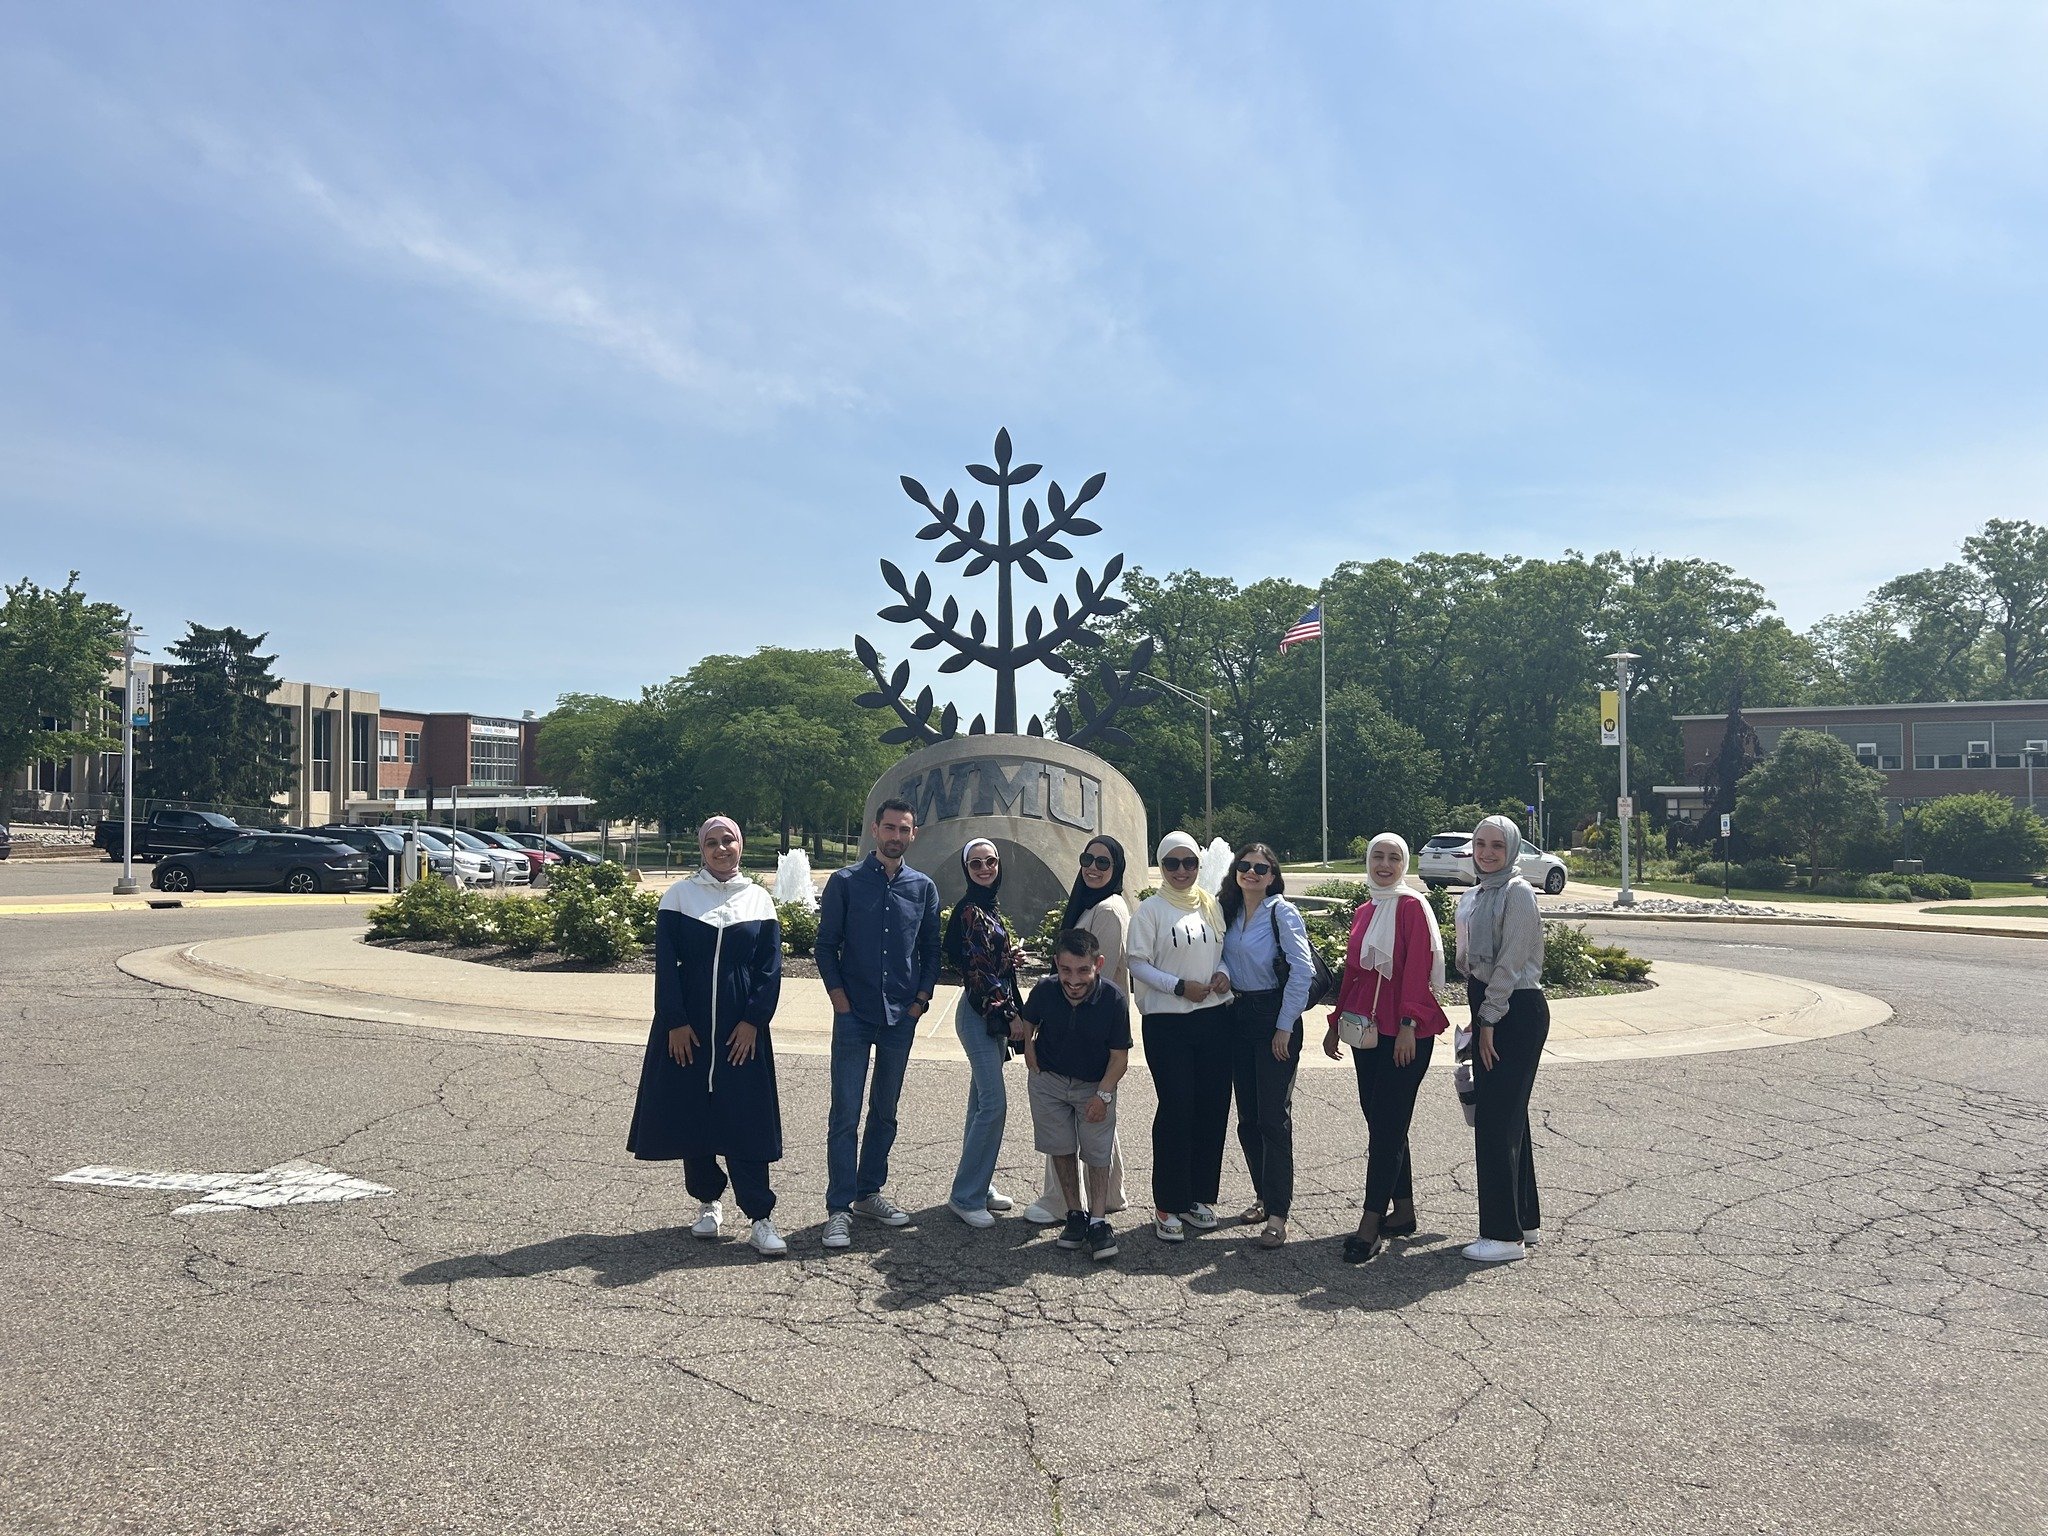 A thousand thank-yous to the terrific tour guides who shared their knowledge and passion with the Kalamazoo UJLEP cohort on Friday.

The group started their day learning about and touring WMed Innovation Center with Sandra Cochrane, who serves as Ass